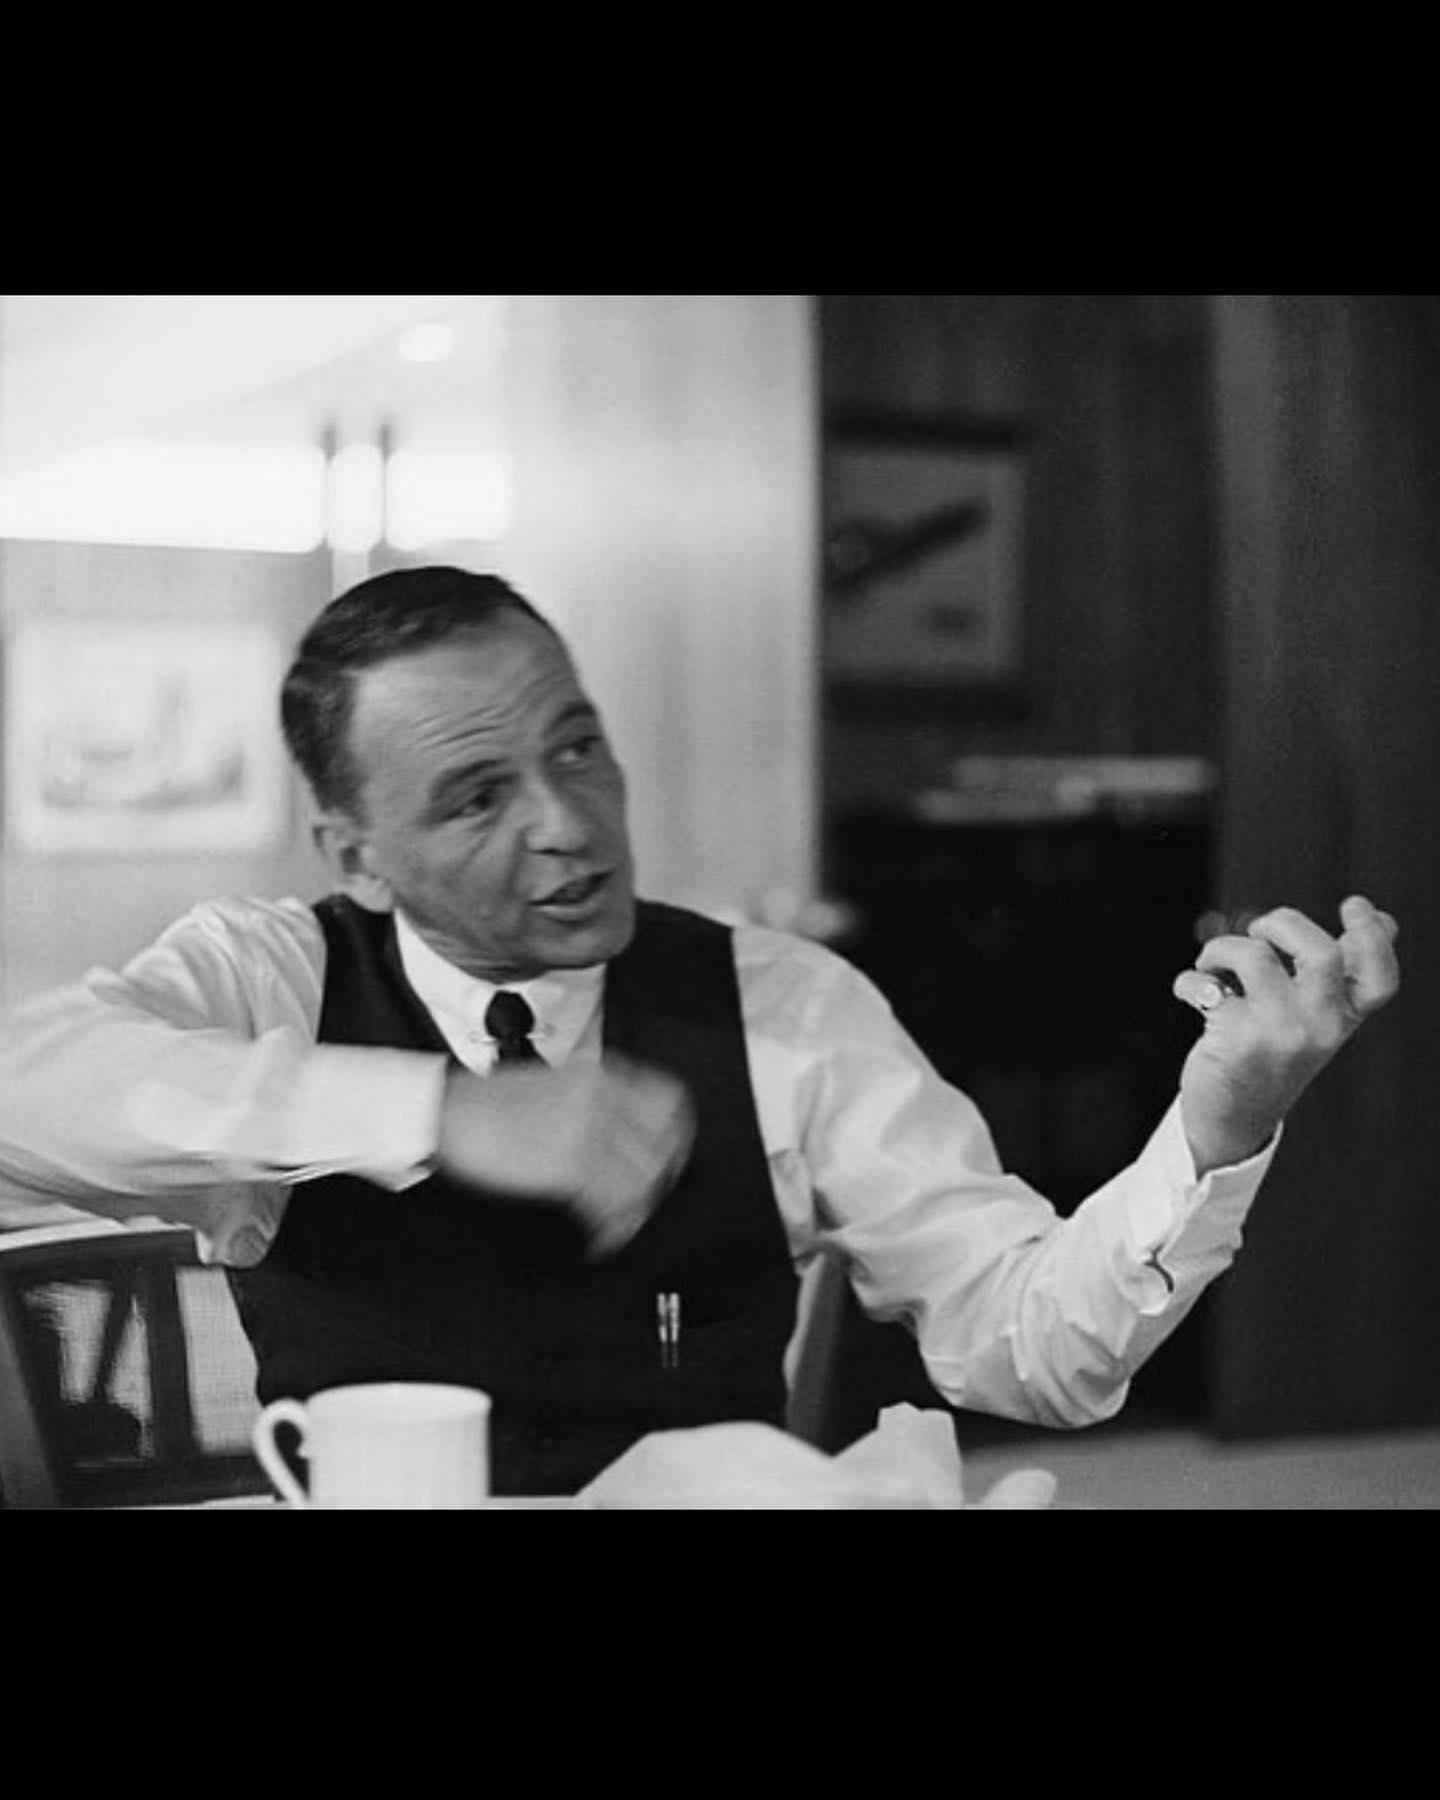 Jazz, Blues And Lounge Music - Frank Sinatra by John Dominis#entertainment #singer #photography